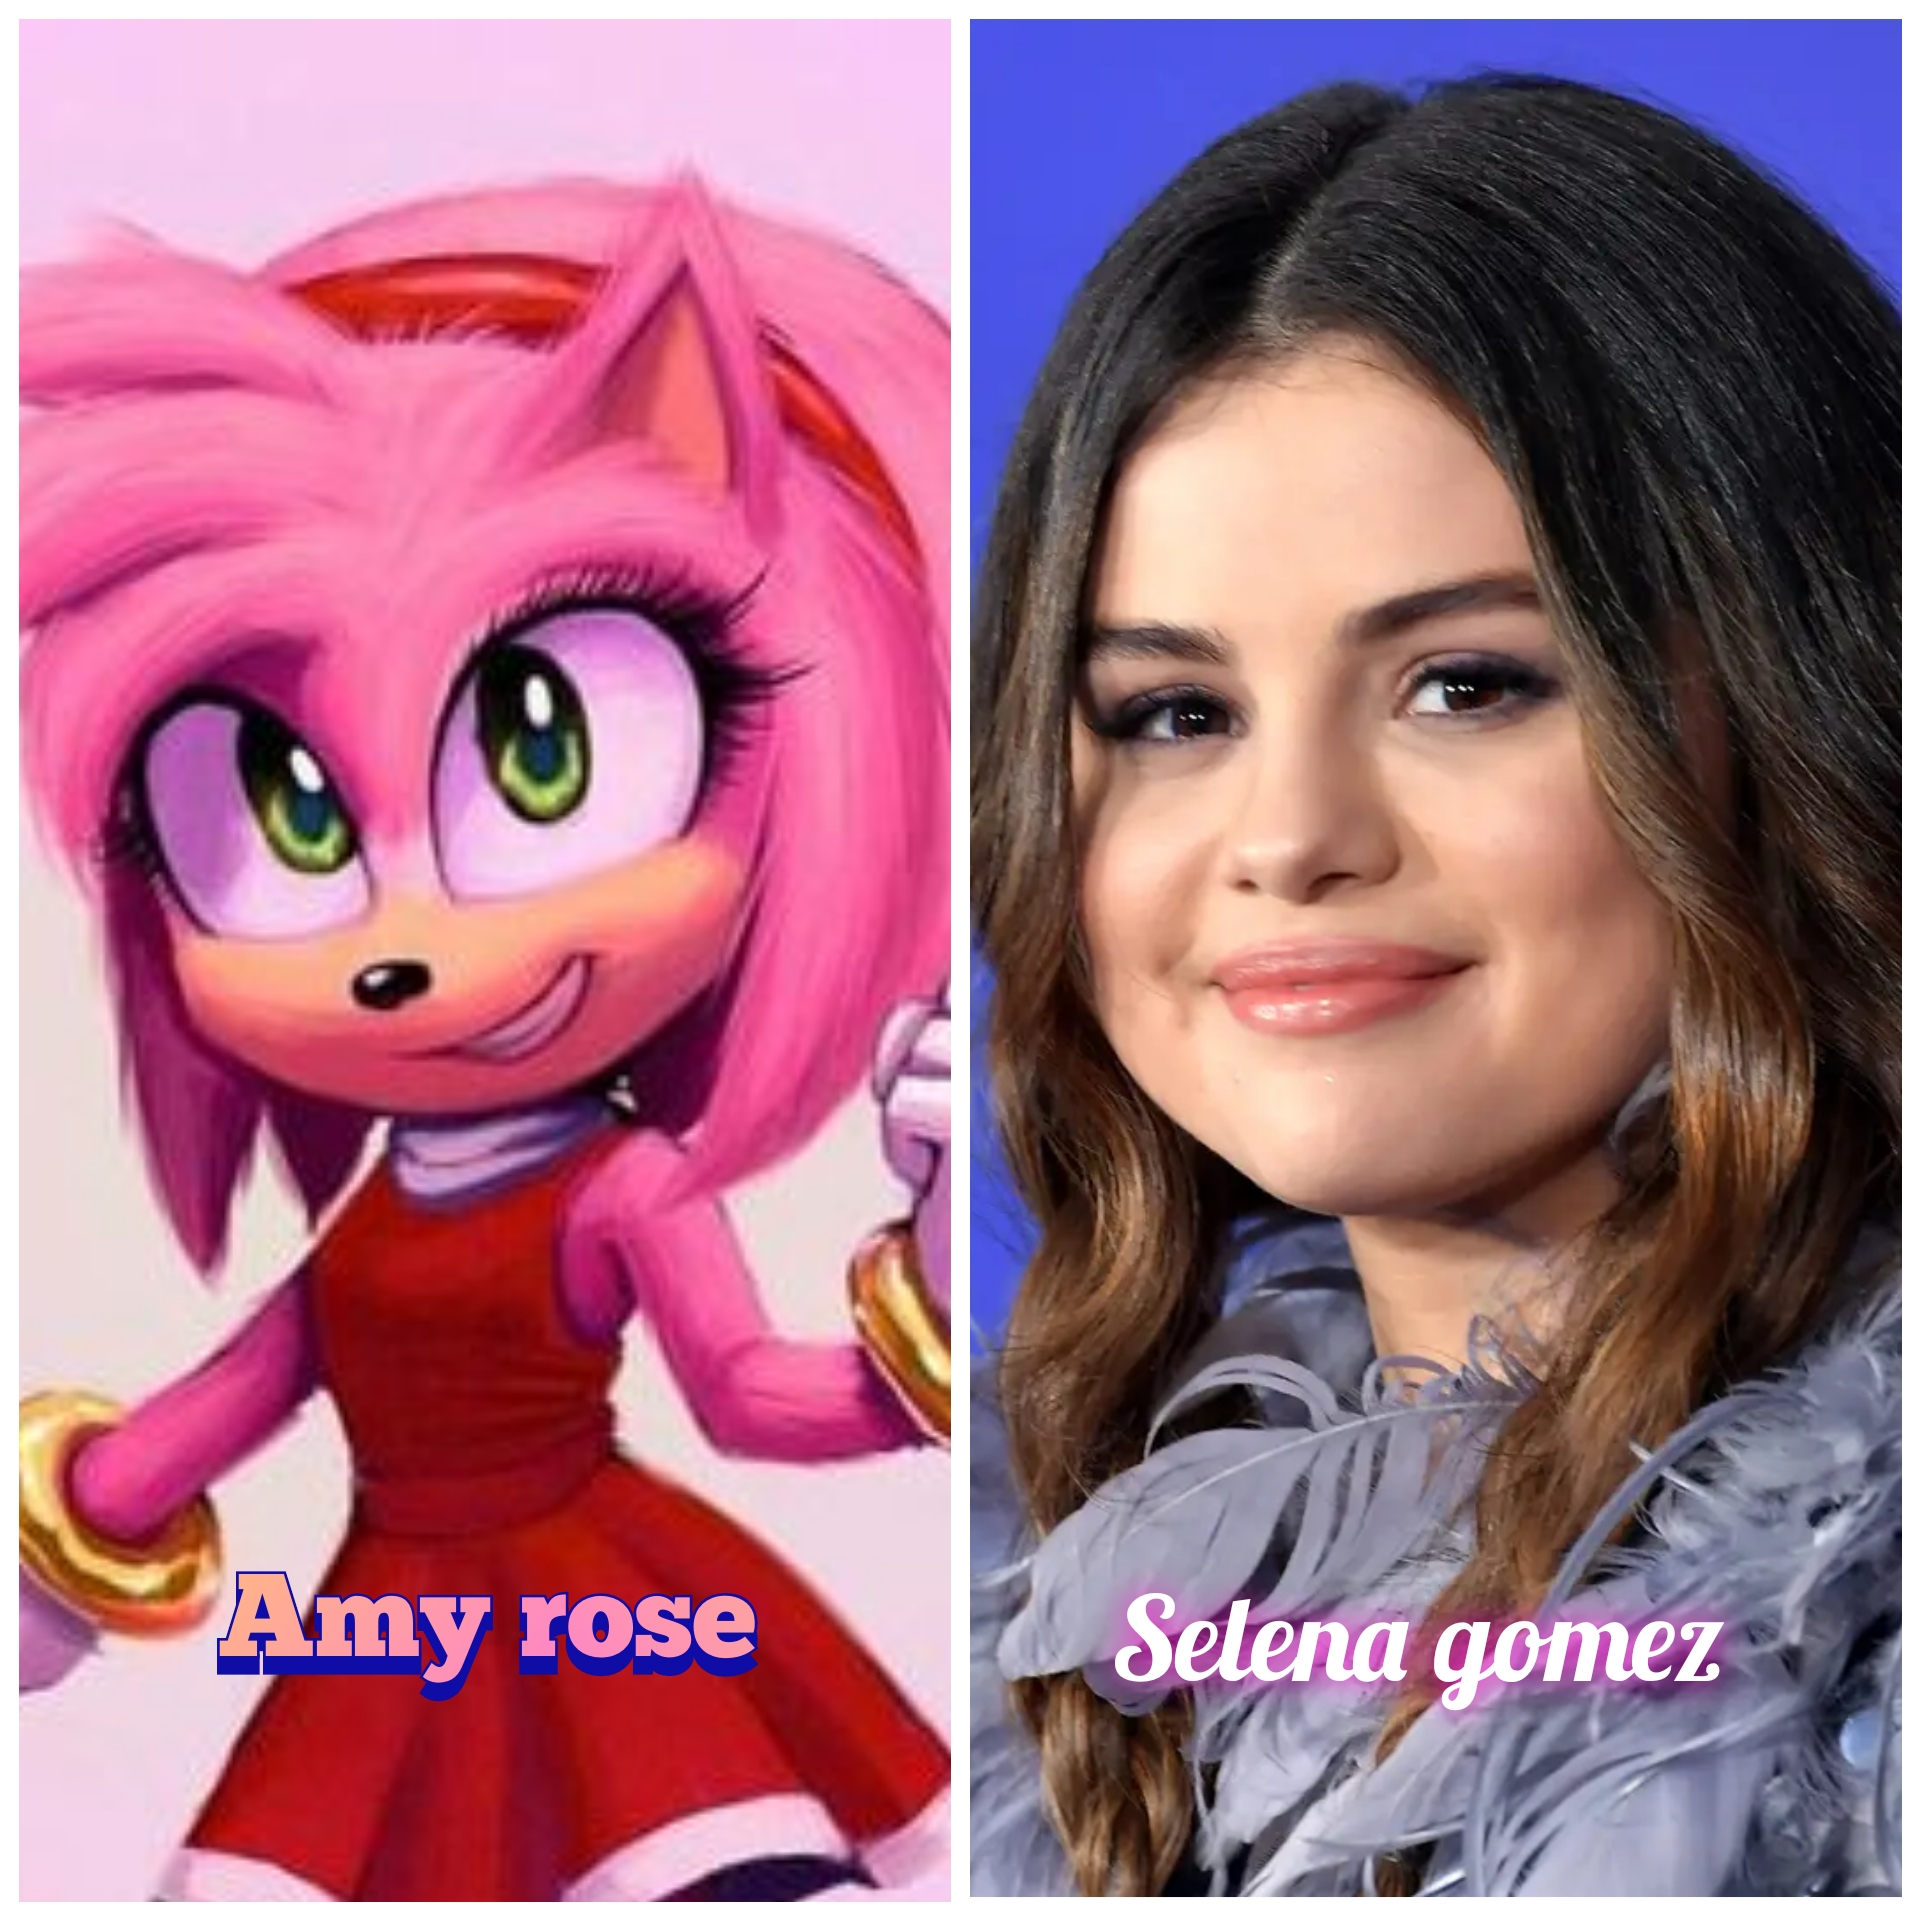 Sonic movie 3 cast: Selena gomez as Amy rose by ULTRAFRANC64 on